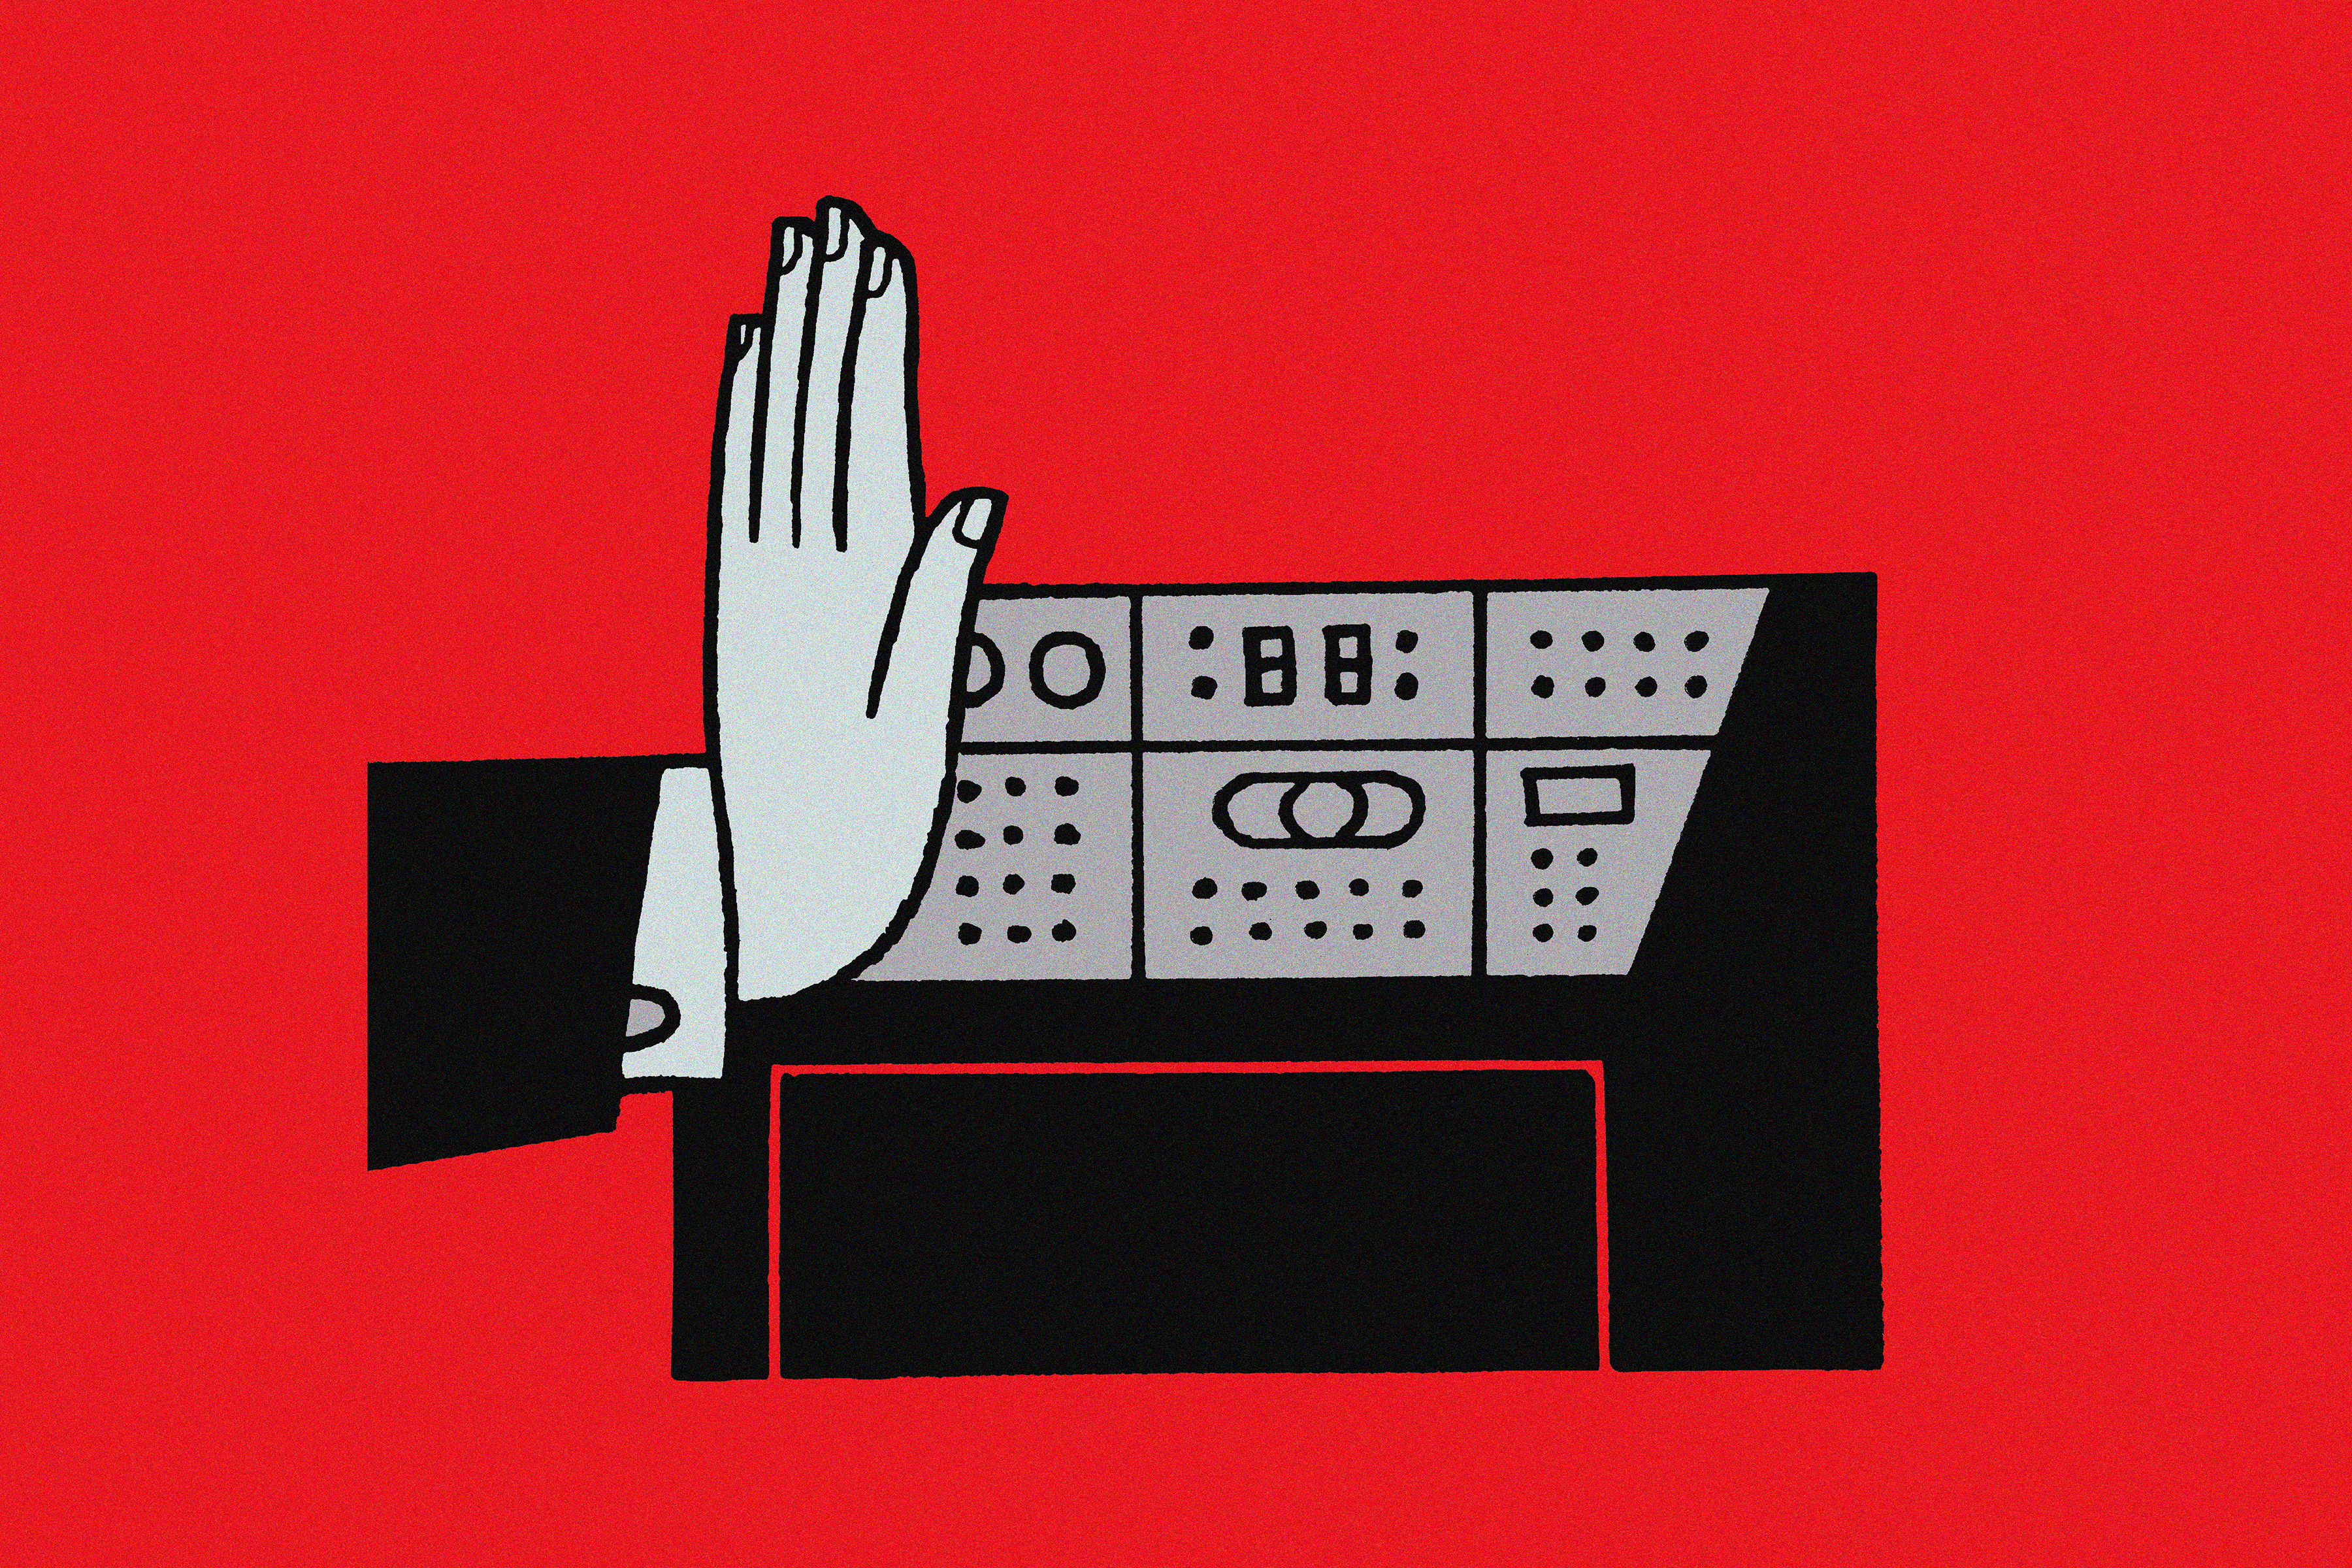 A drawing of a hand making a “stop” gesture toward a computer console.